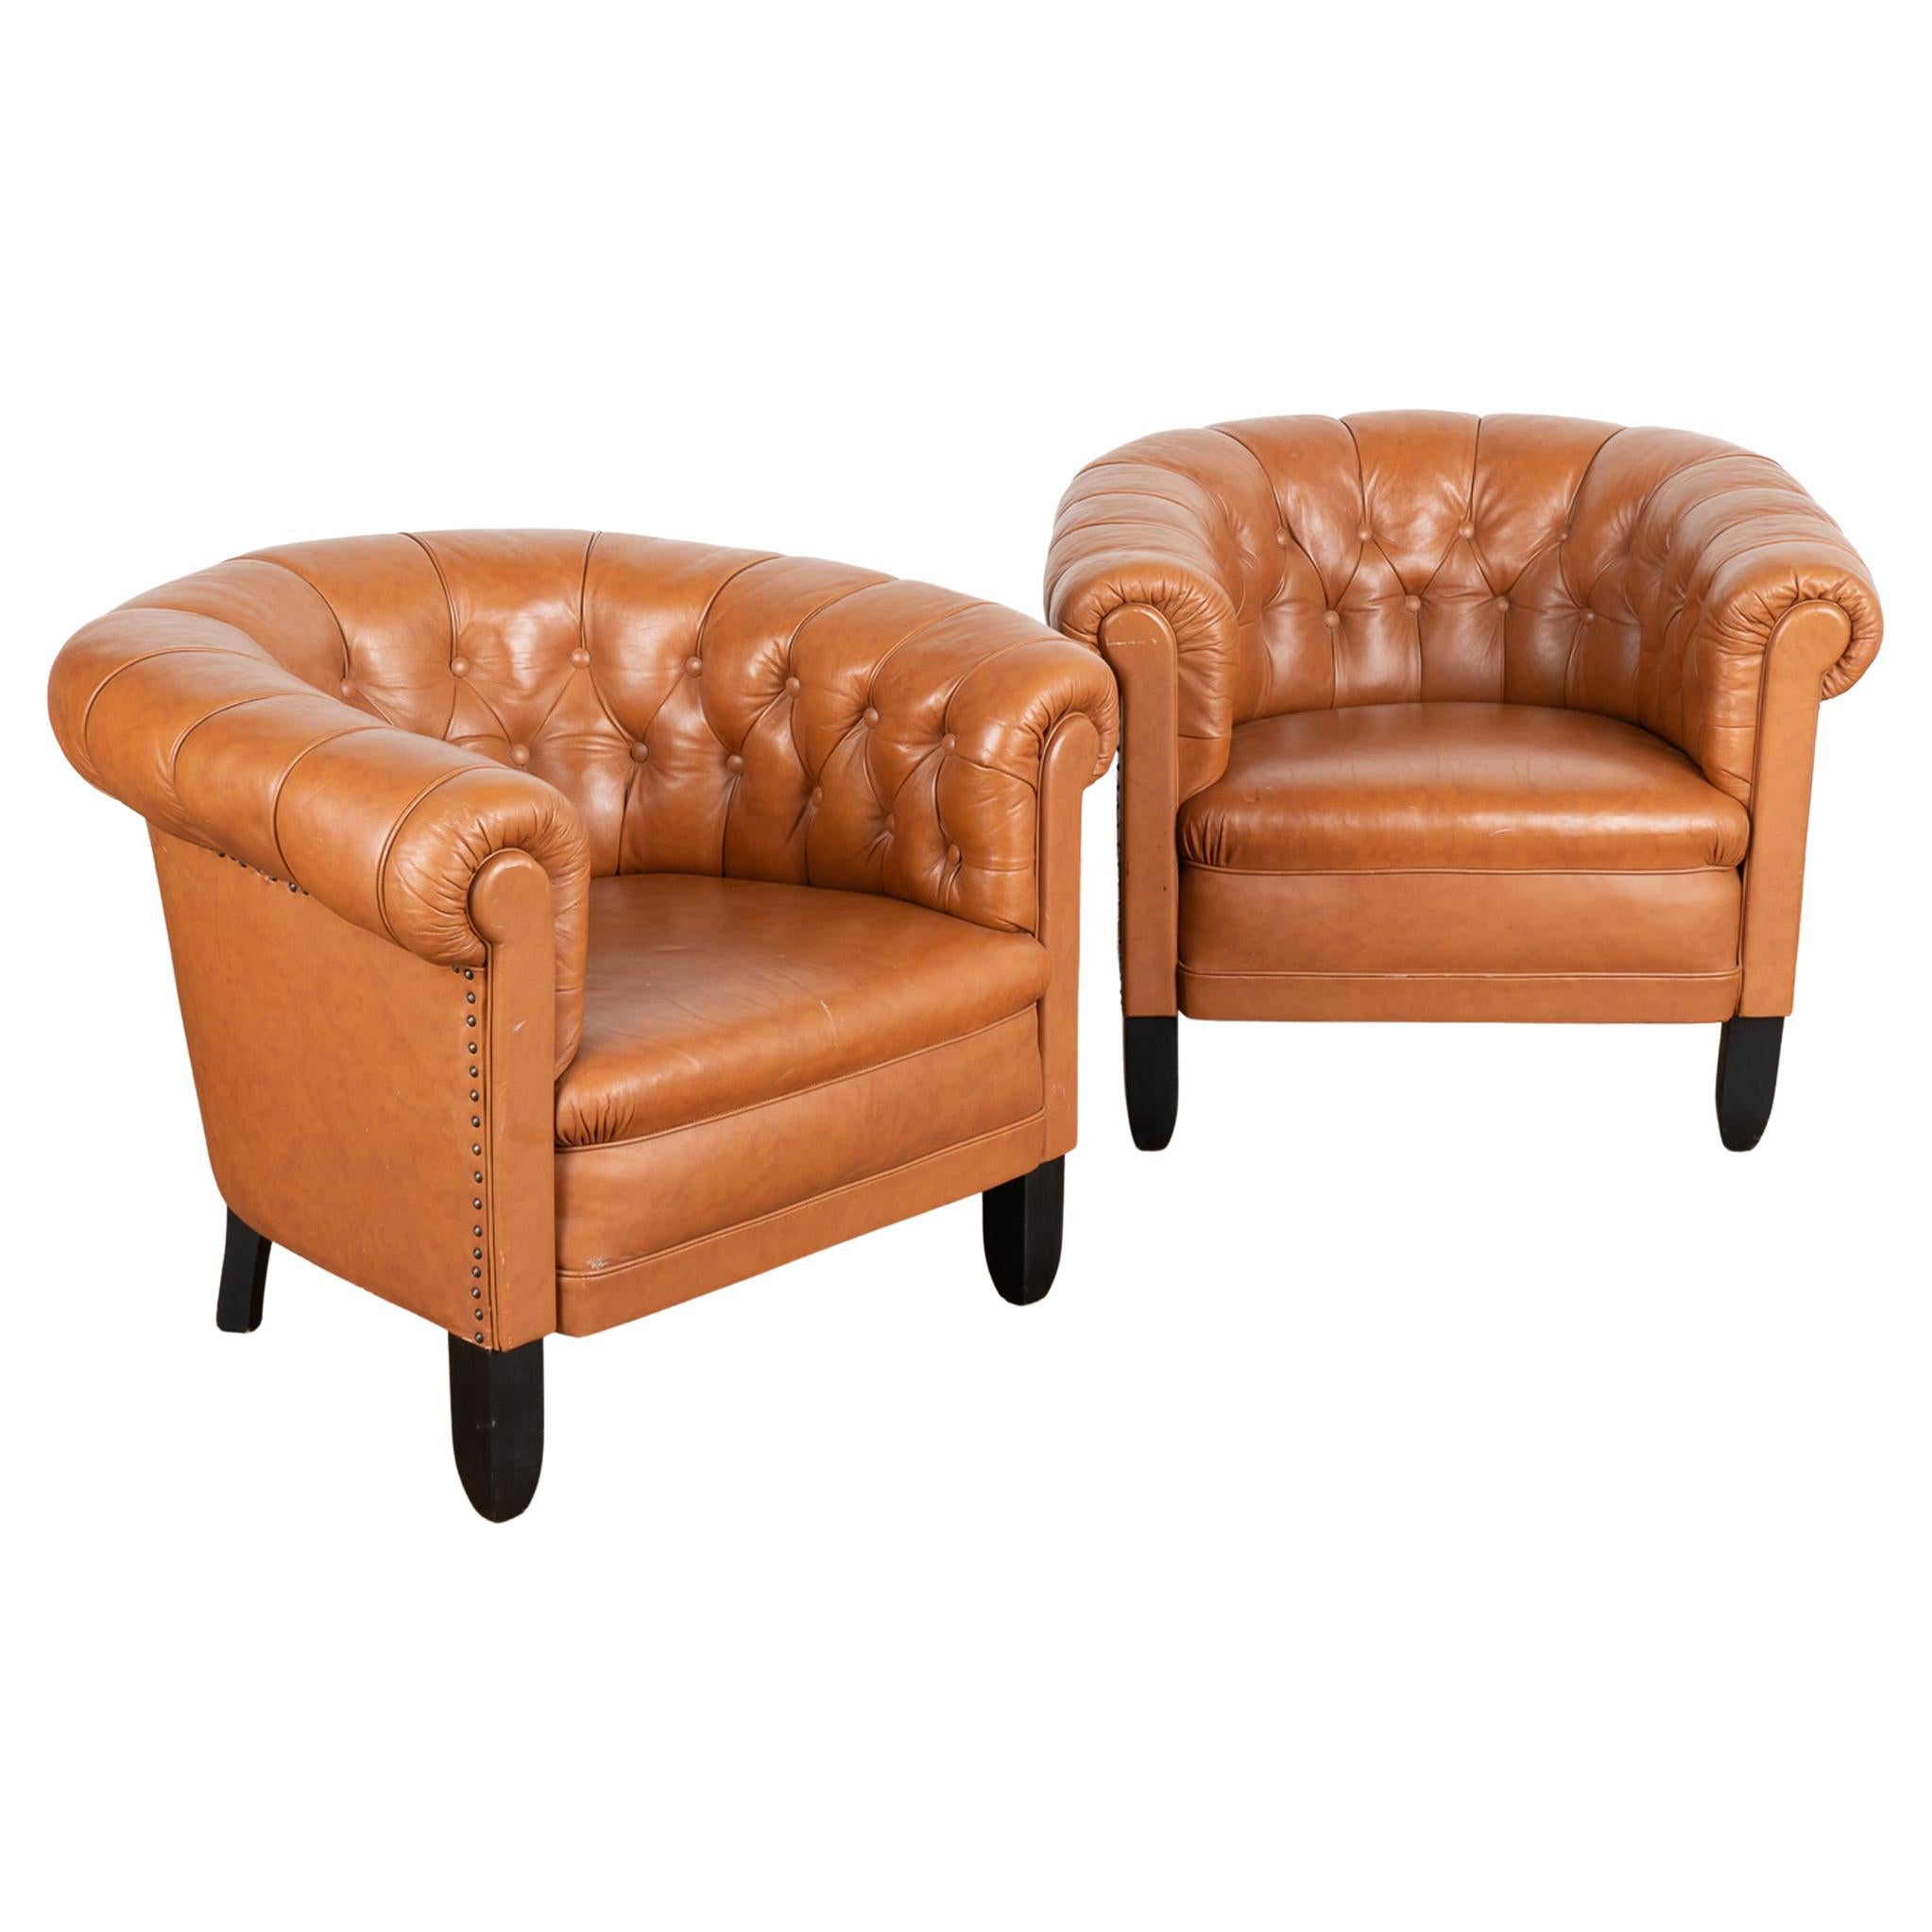 Pair, Vintage Brown Leather Barrel Back Arm Chairs, Denmark circa 1940 For Sale